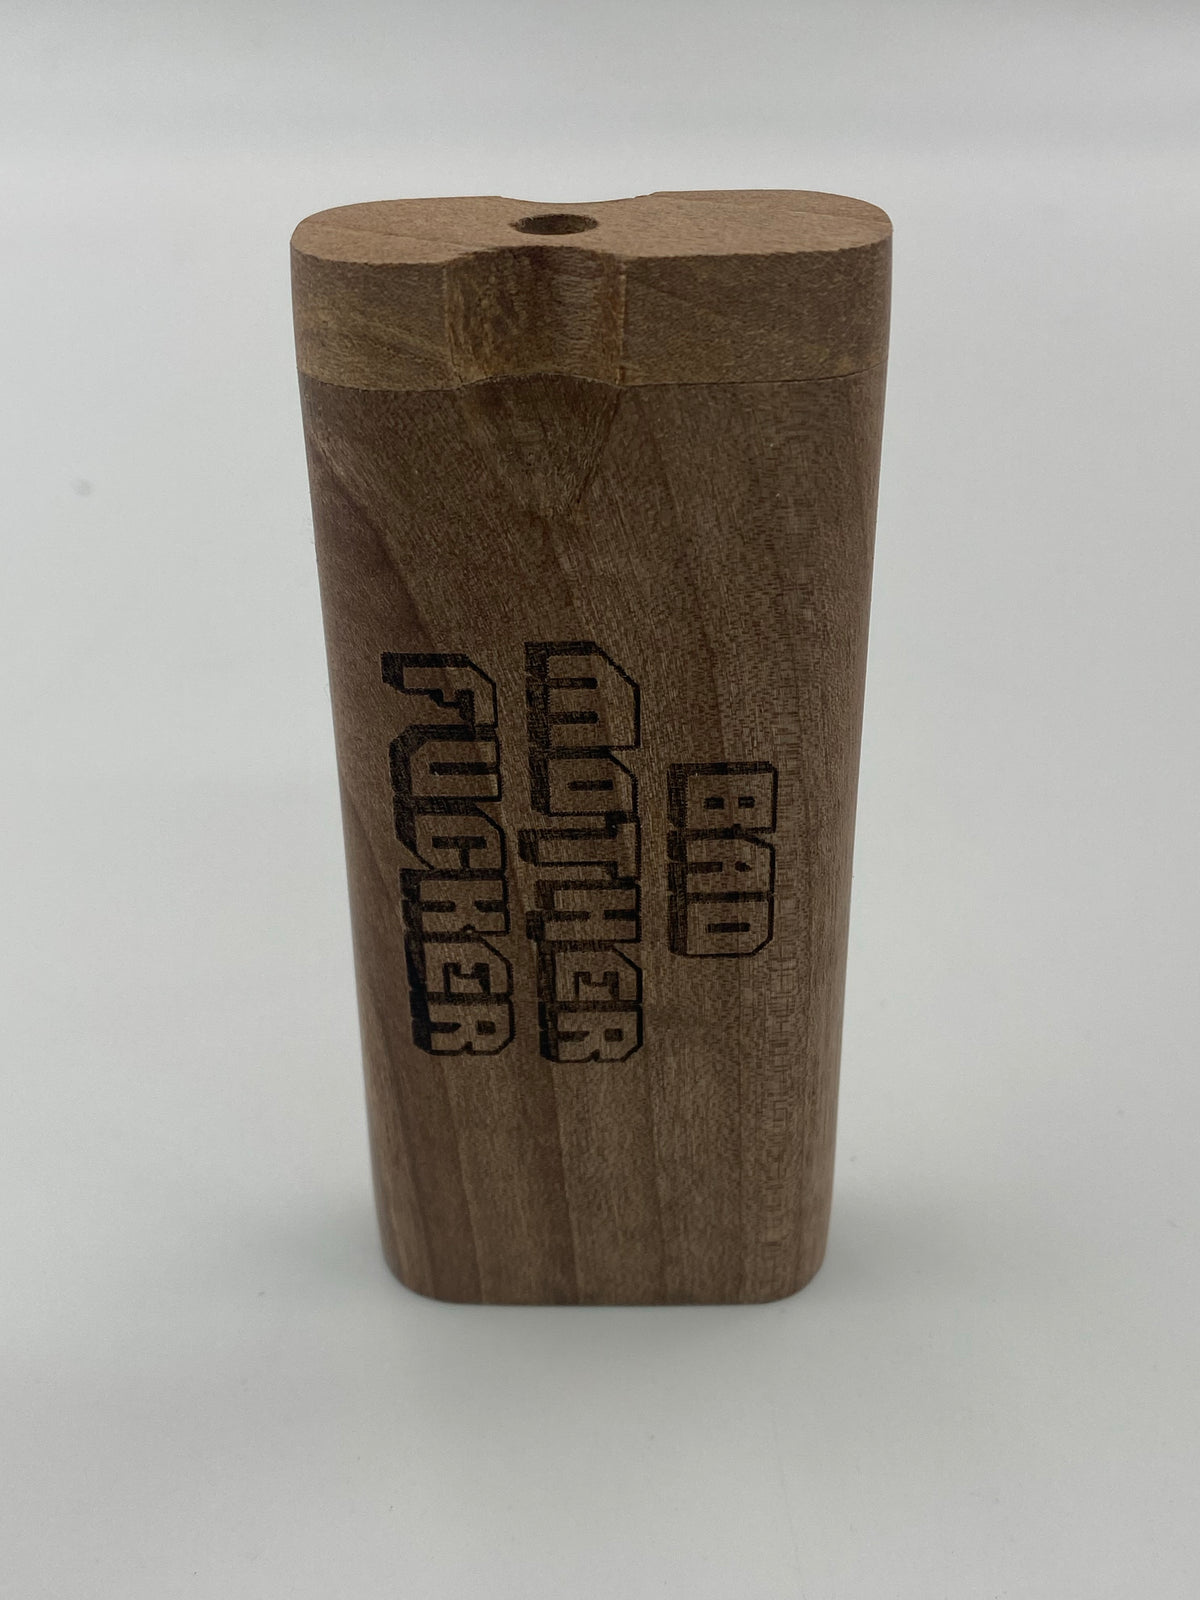 LARGE BAD MOTHER FUCKER WOOD DUGOUT